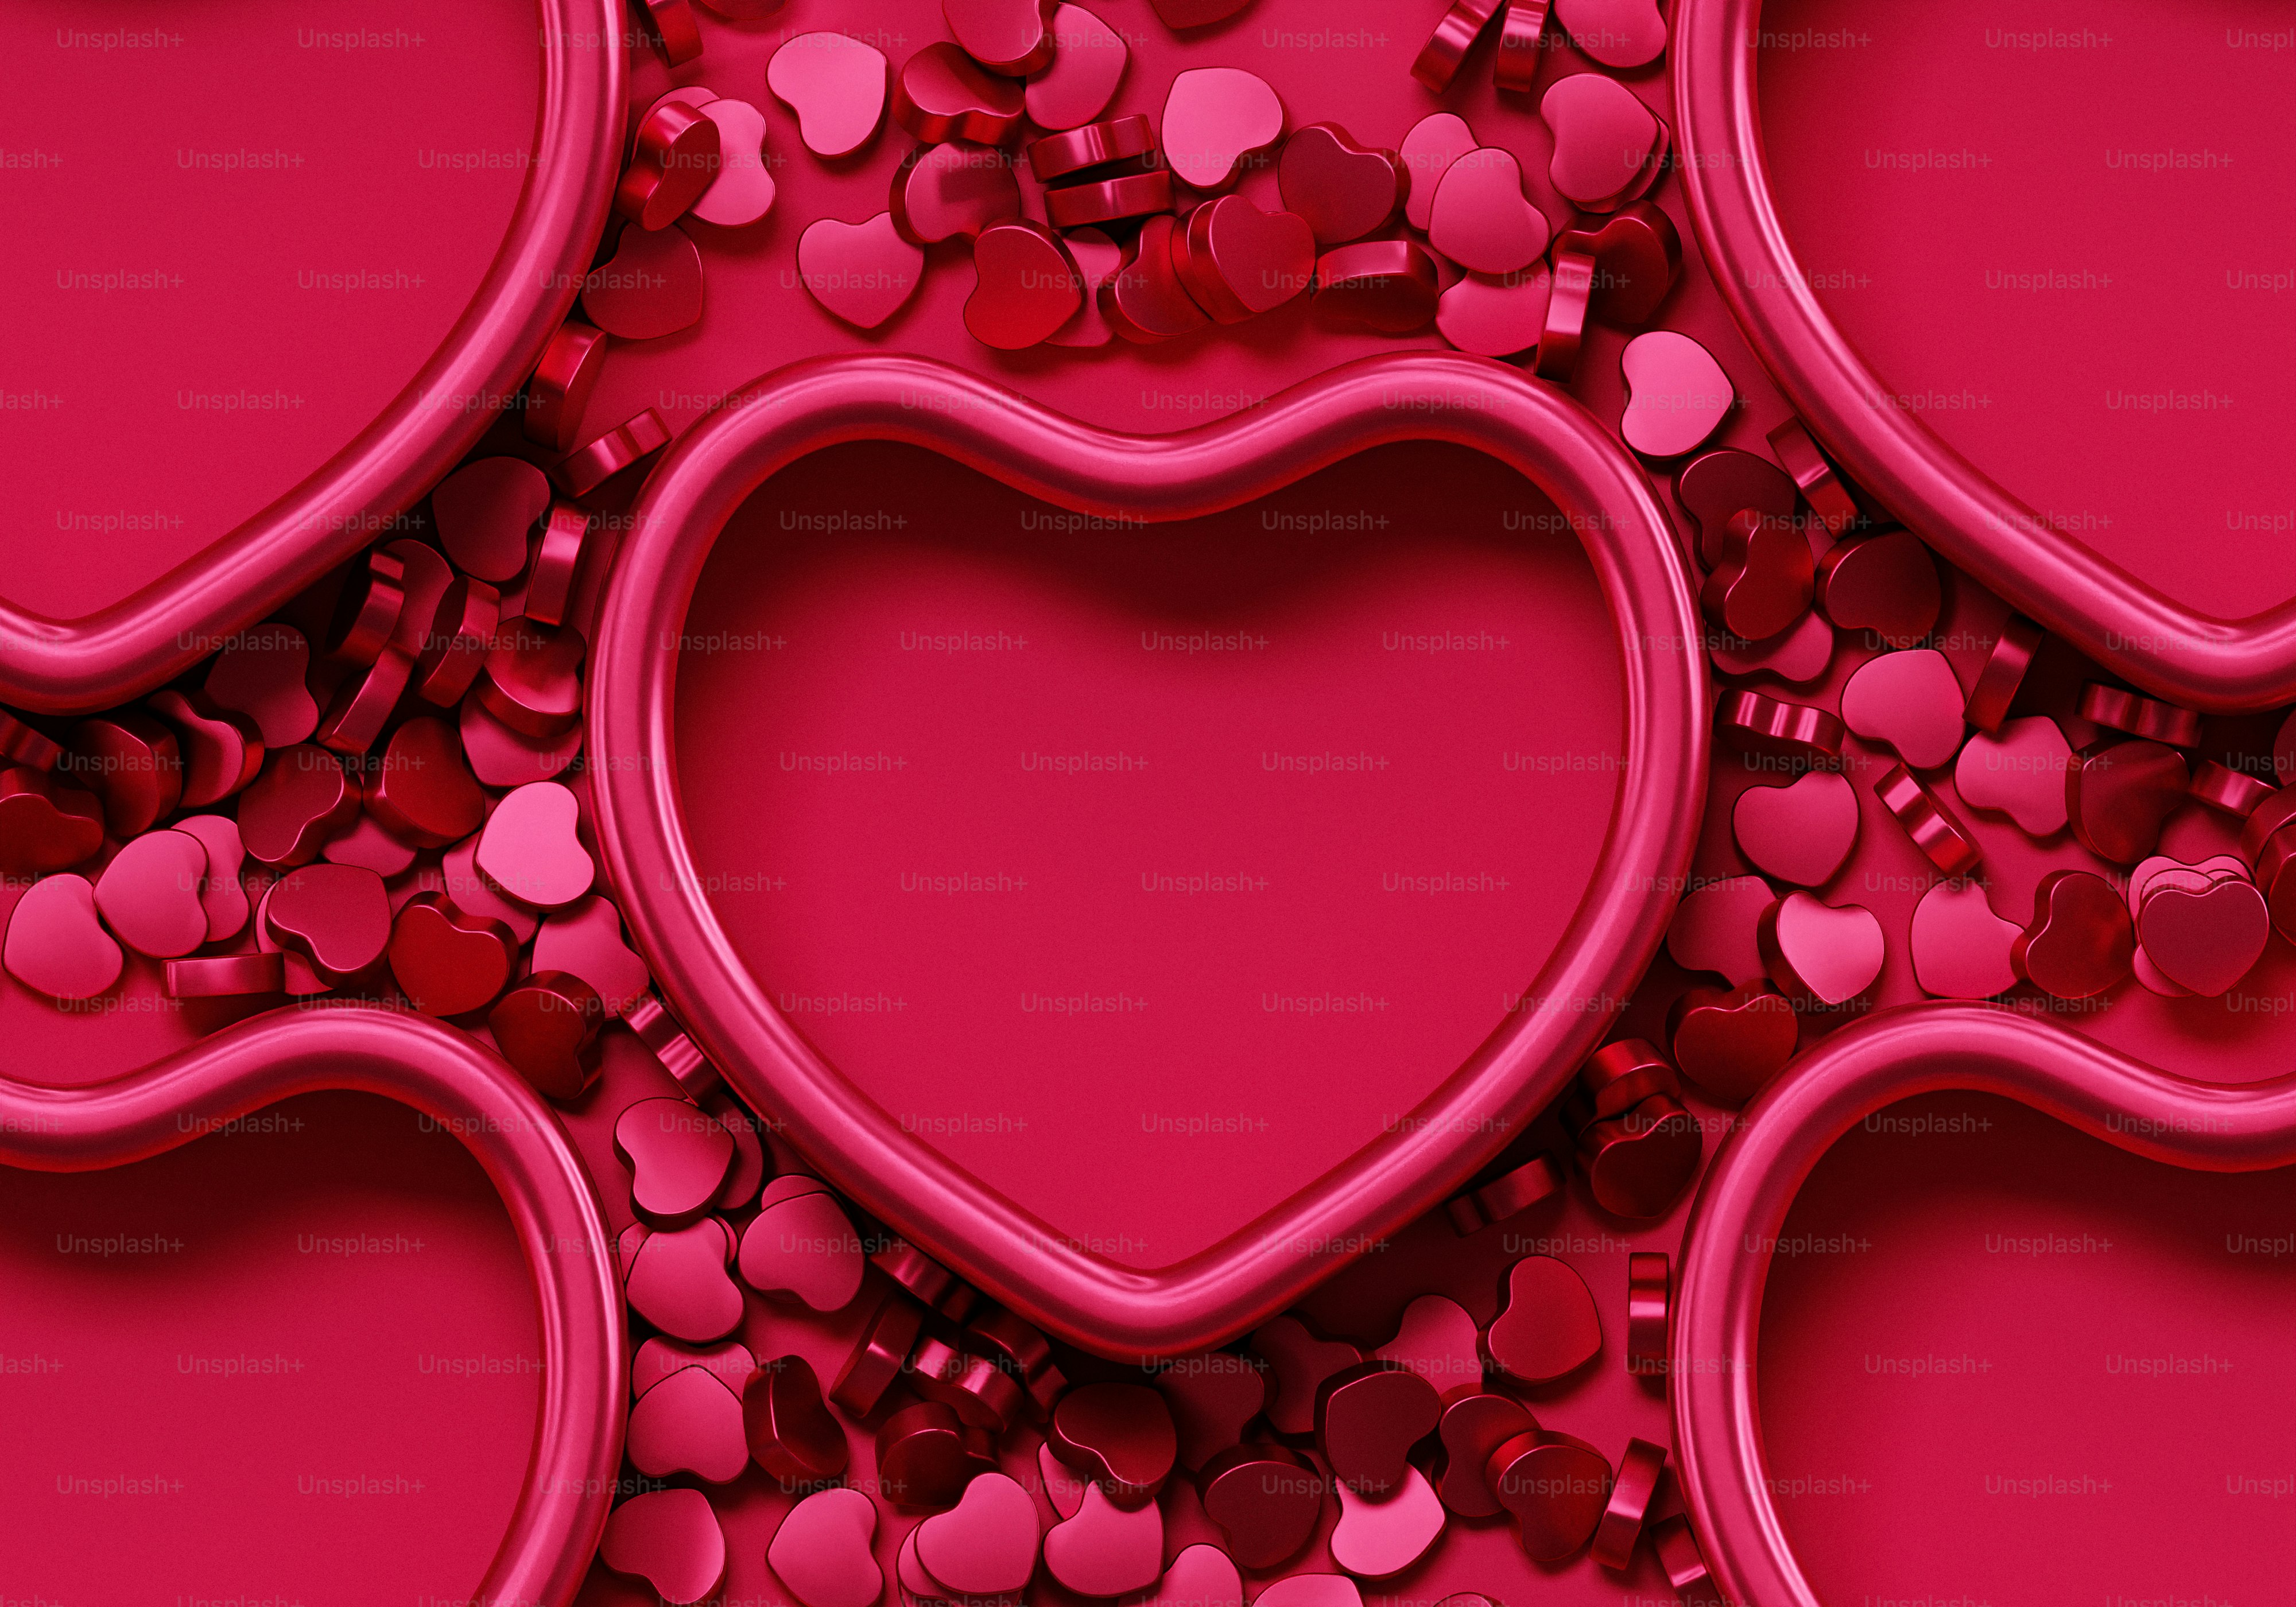 A heart shaped cookie sitting on top of a pink cloth photo – Sympathy Image  on Unsplash